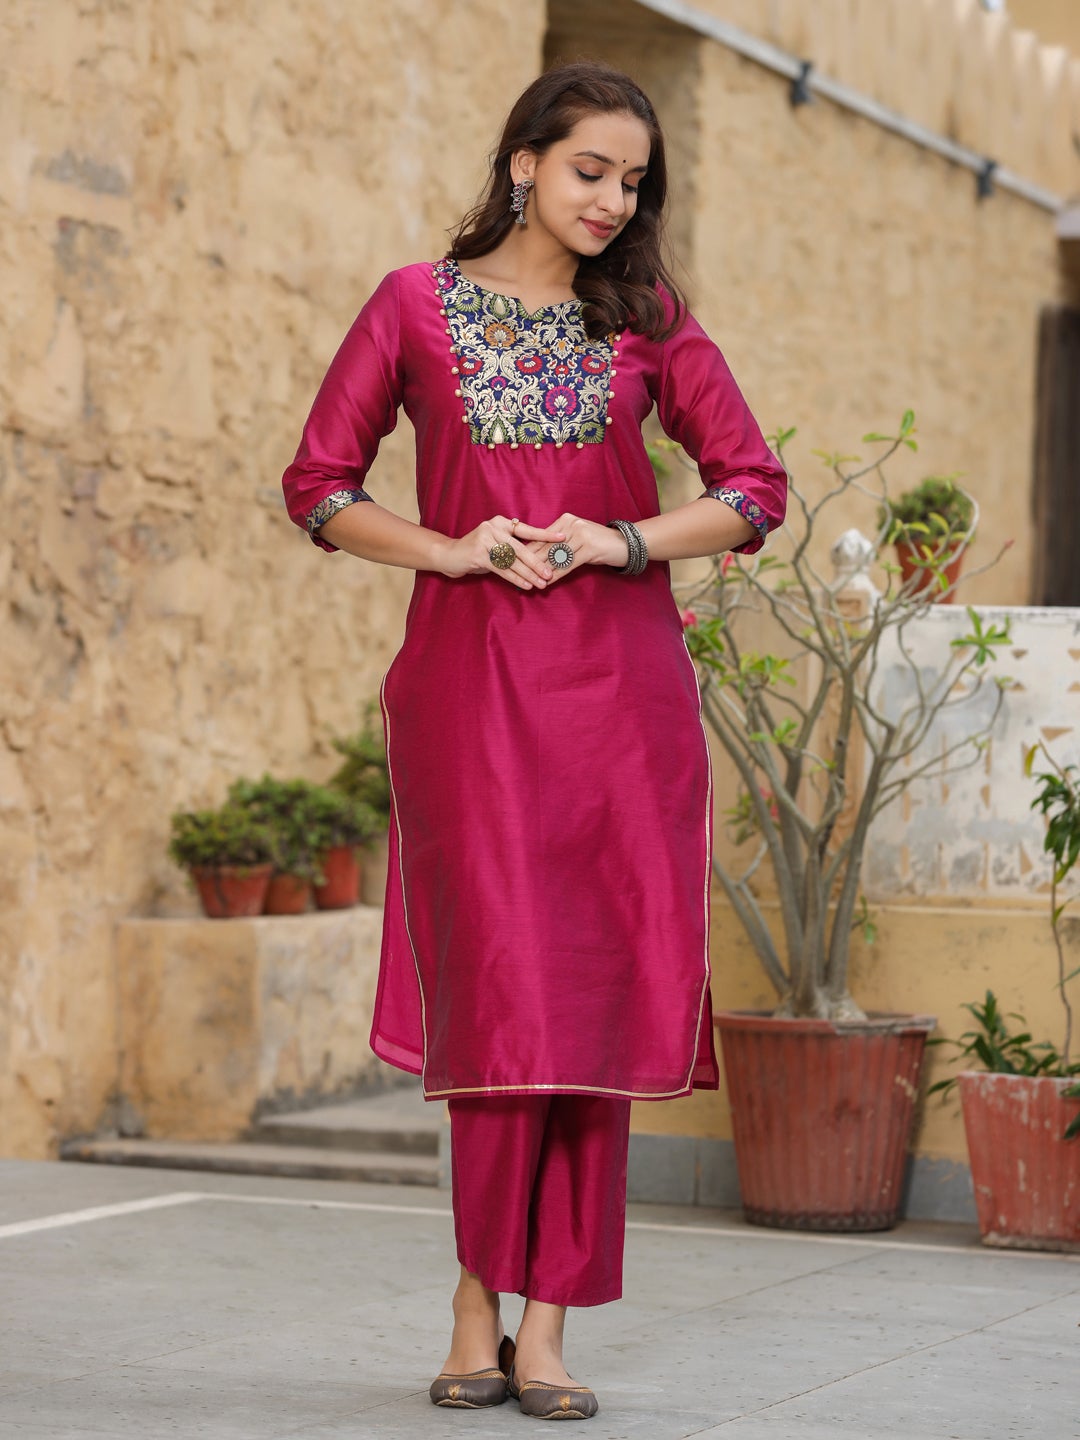 Shop Solid Brocade Yoke Straight Kurta with Pants Online at Jaipur Kurti. Shop Classic Embroidery Ddesigned Clothes for Women Perfect for all special occasions